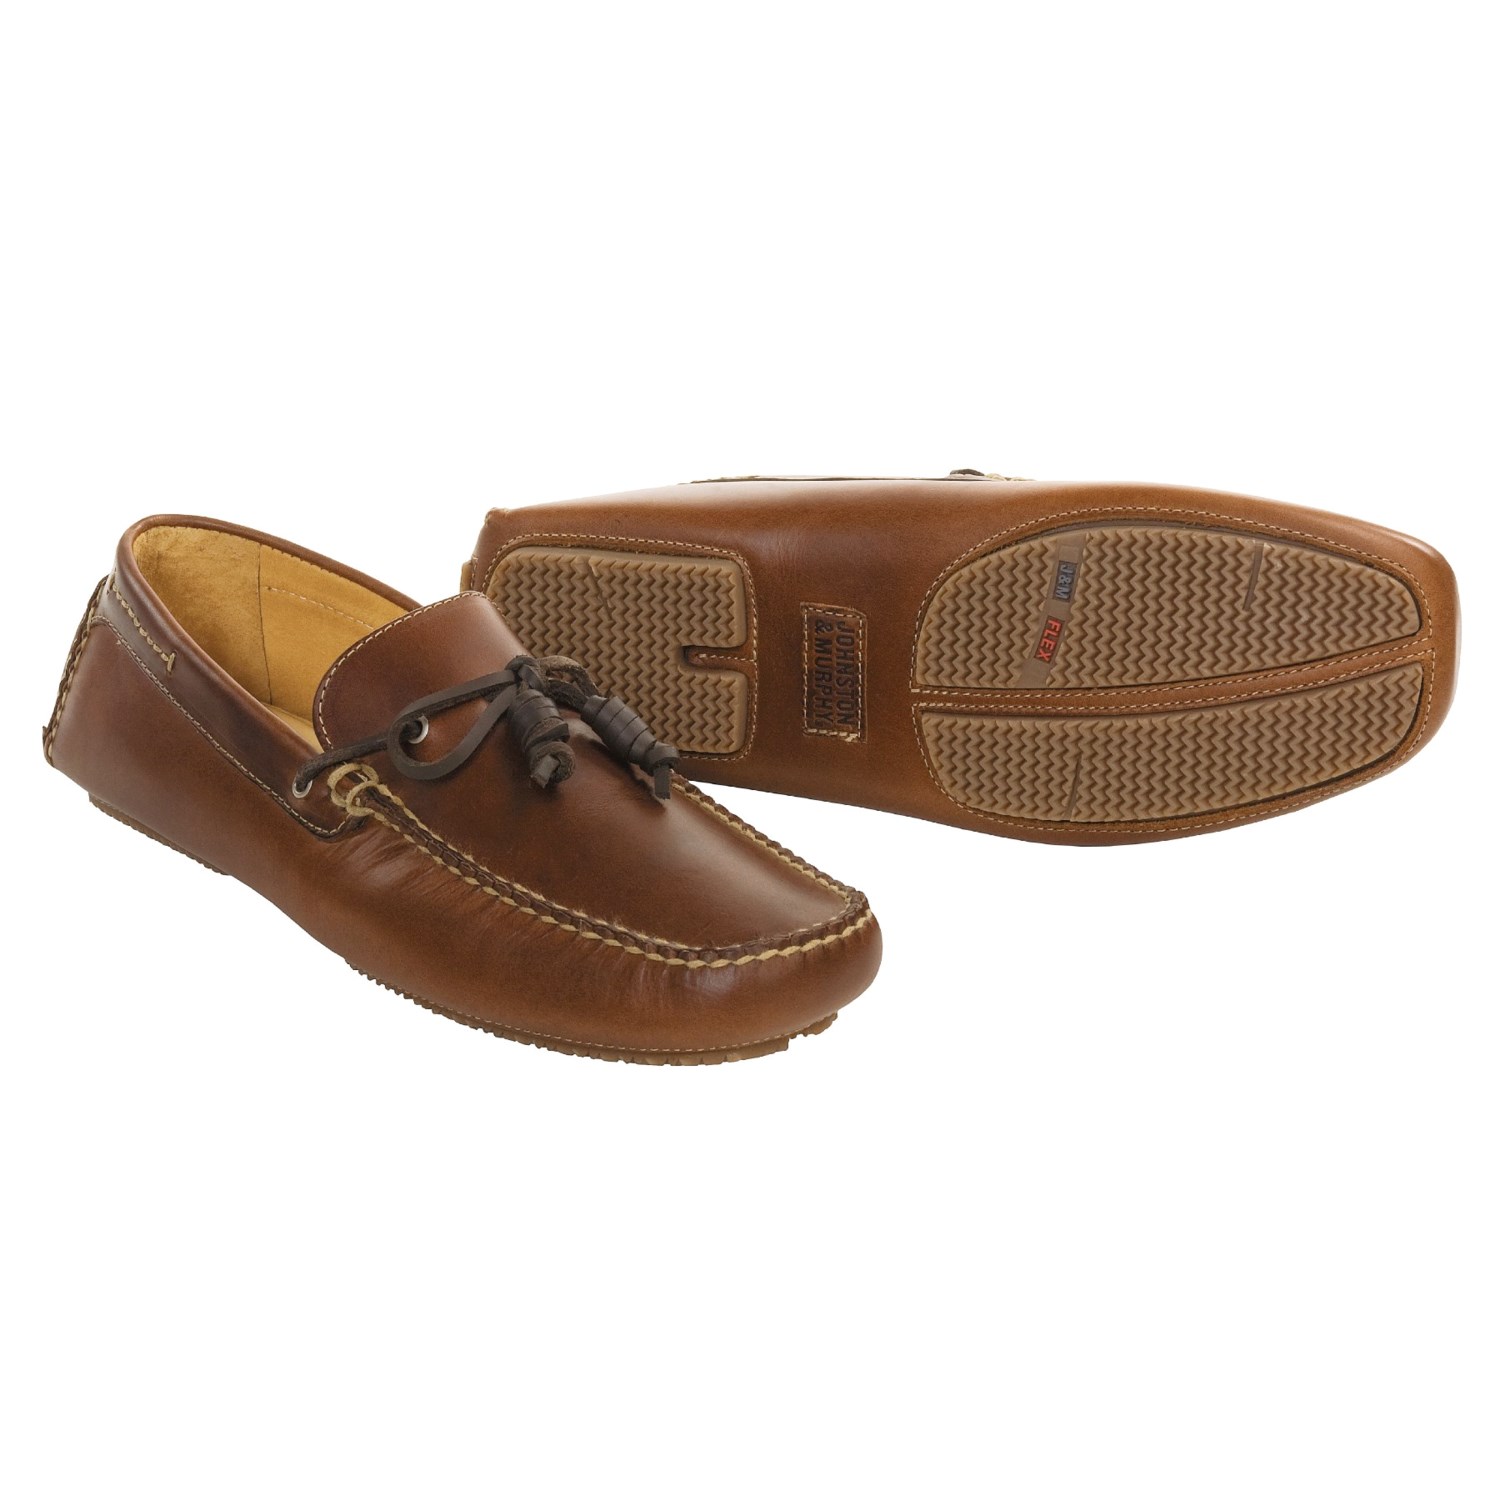 Johnston & Murphy Kenney Driving Moccasin Shoes (For Men) 1739R - Save 48%